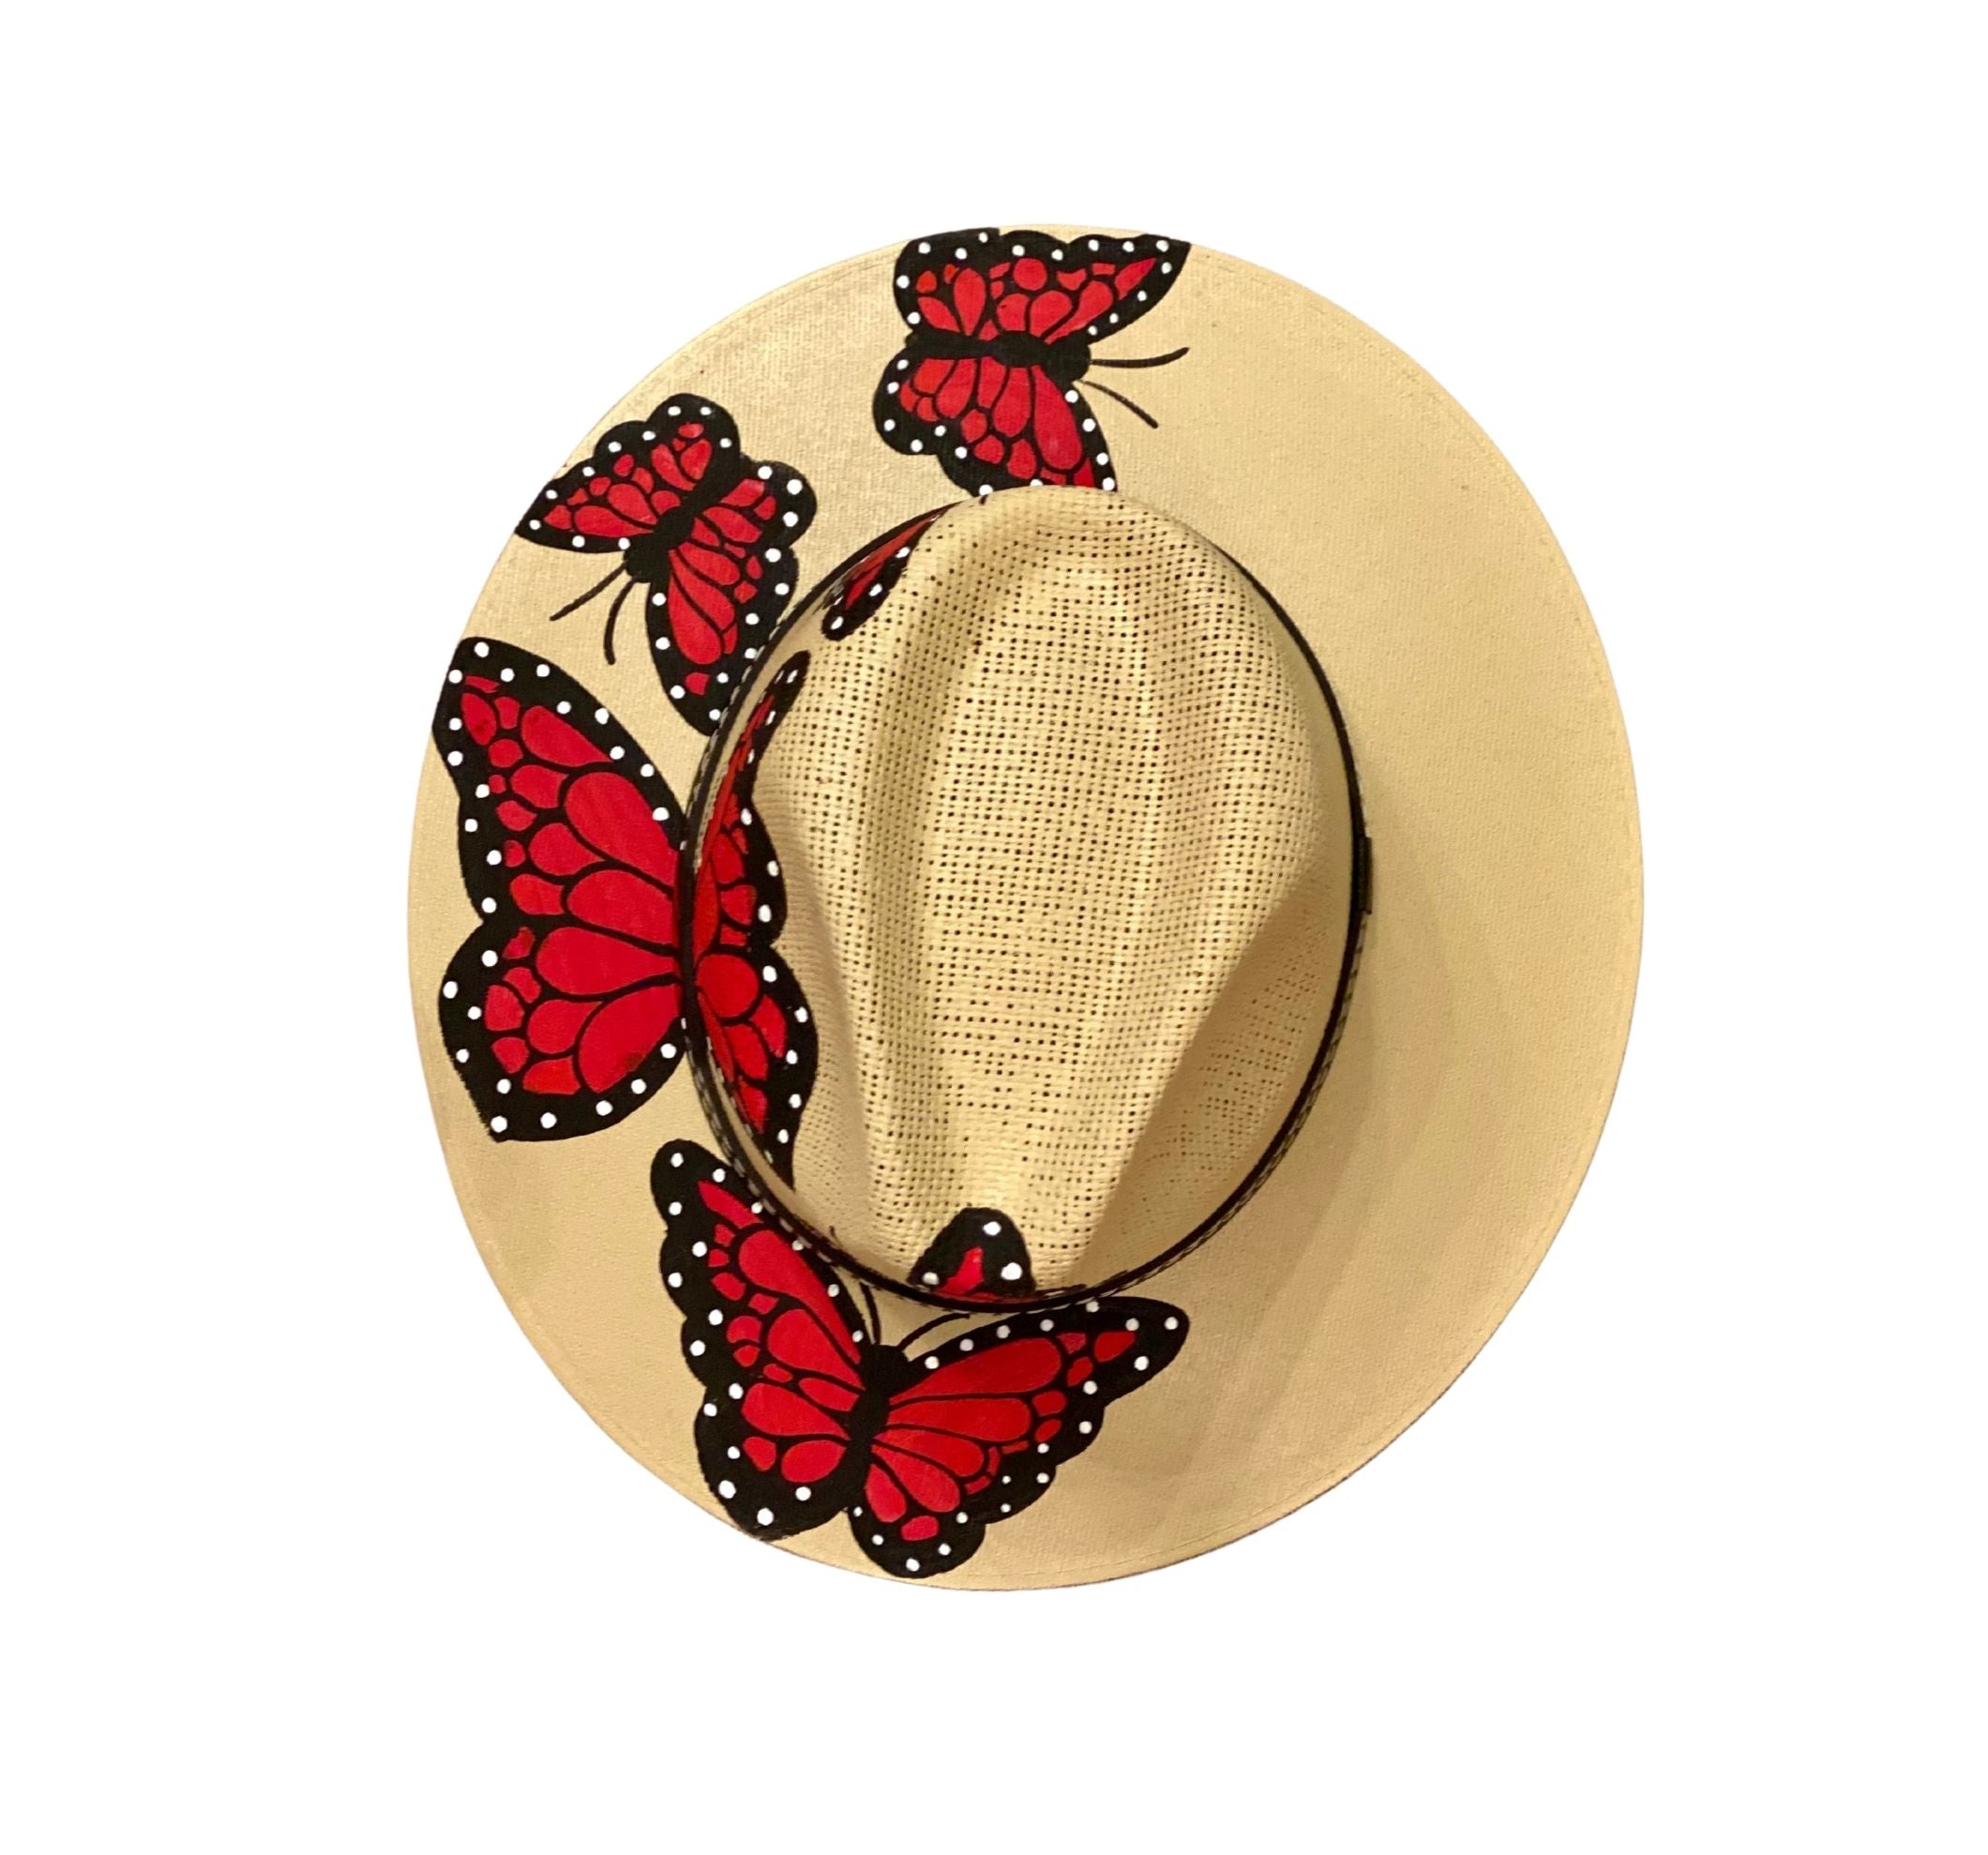 Hand-Painted Hat from Mexico - Butterflies - Straw, Red, Black Medium